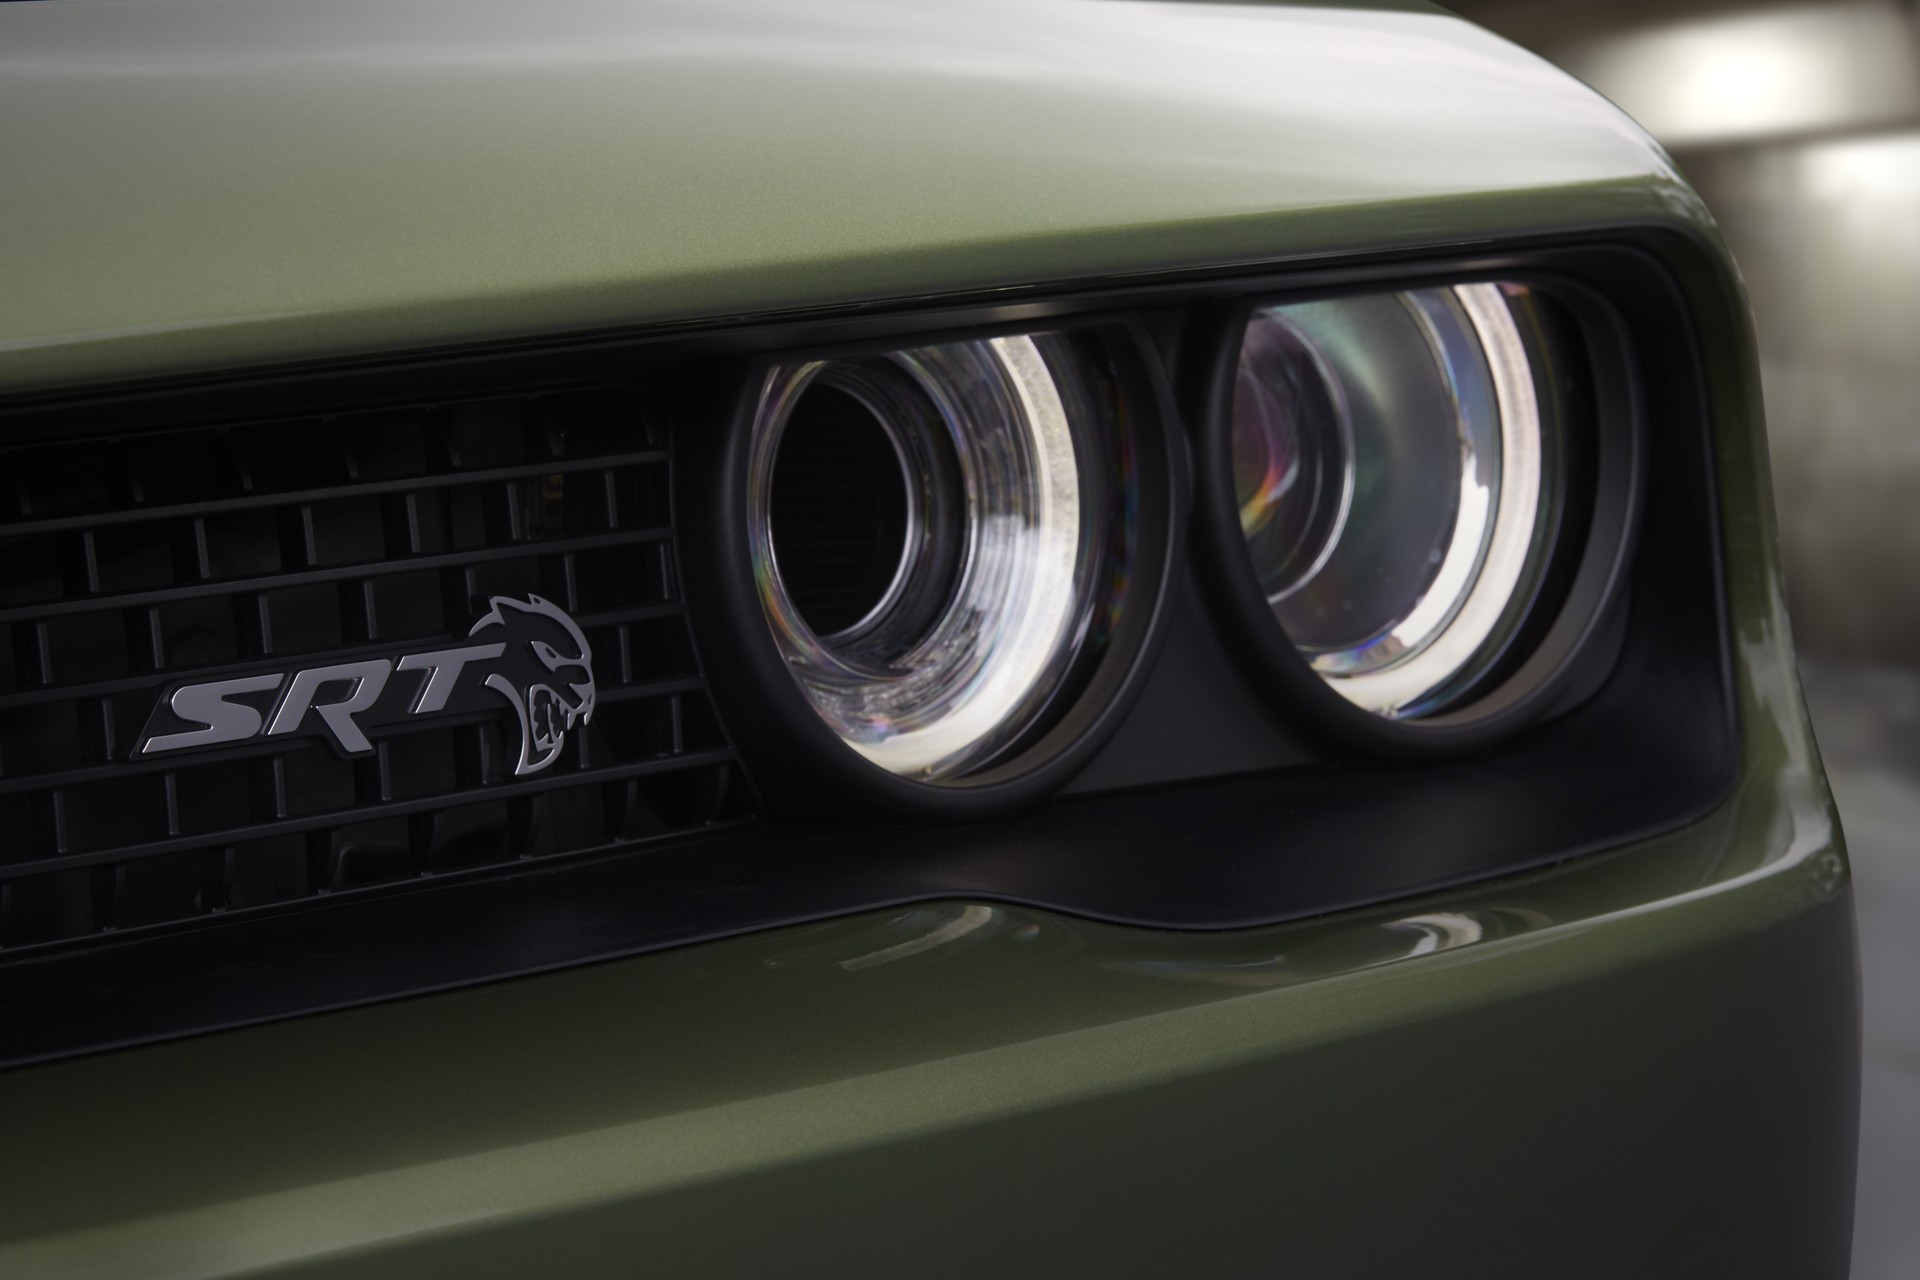 2022 Challenger SRT Hellcat Redeye Widebody Jailbreak in F8 Green, exterior close up of illuminated headlight and SRT badging on grille.